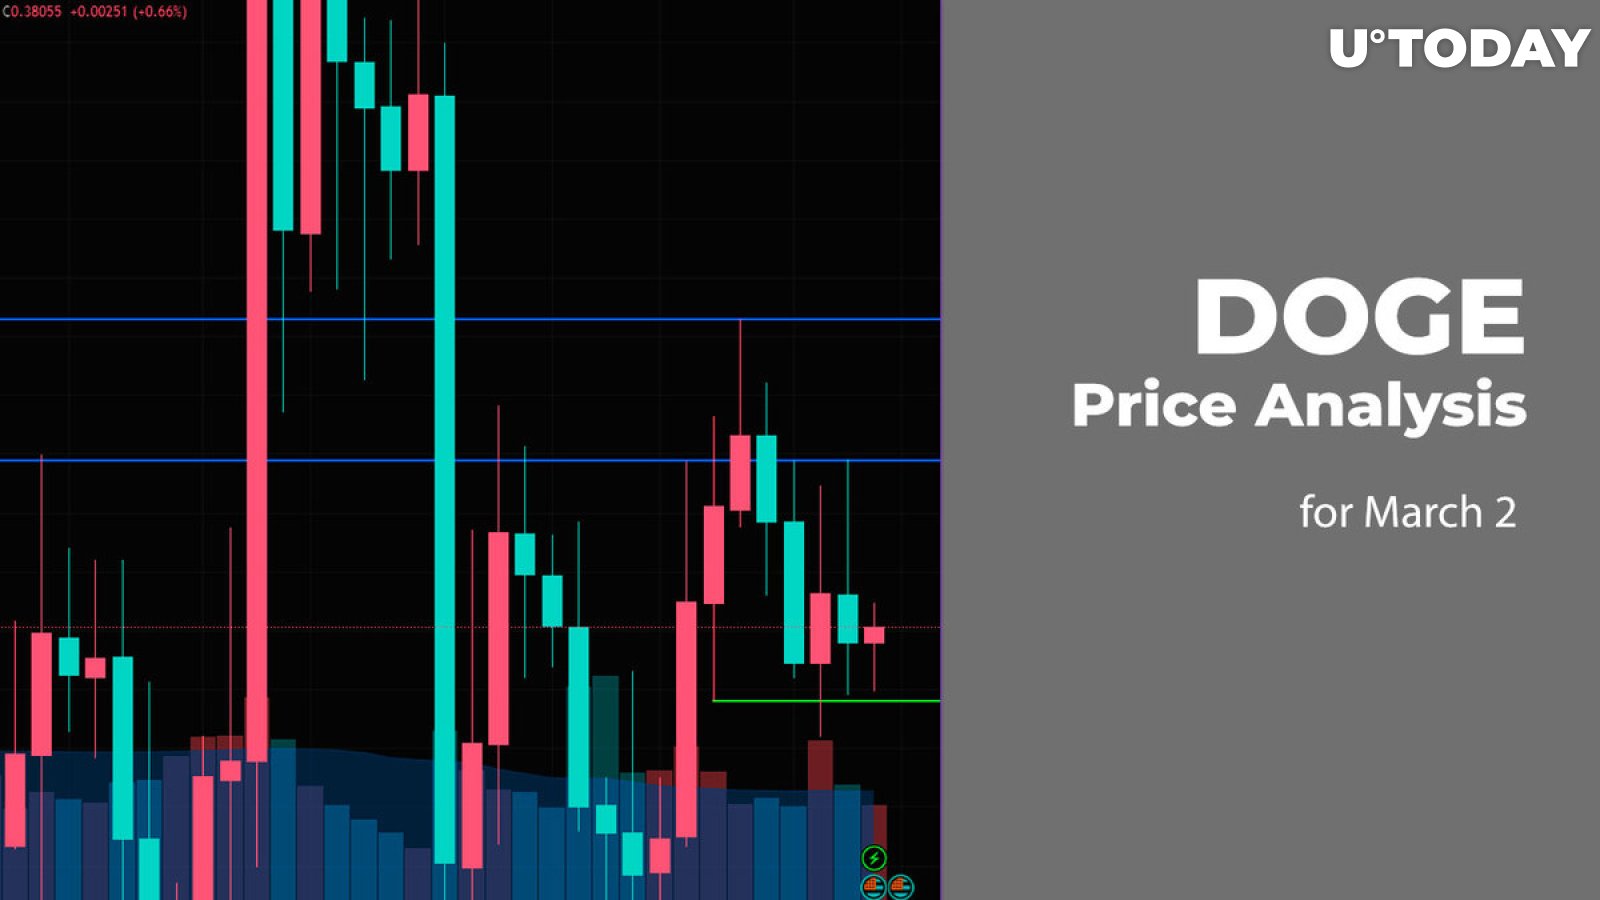 DOGE Price Analysis for March 2